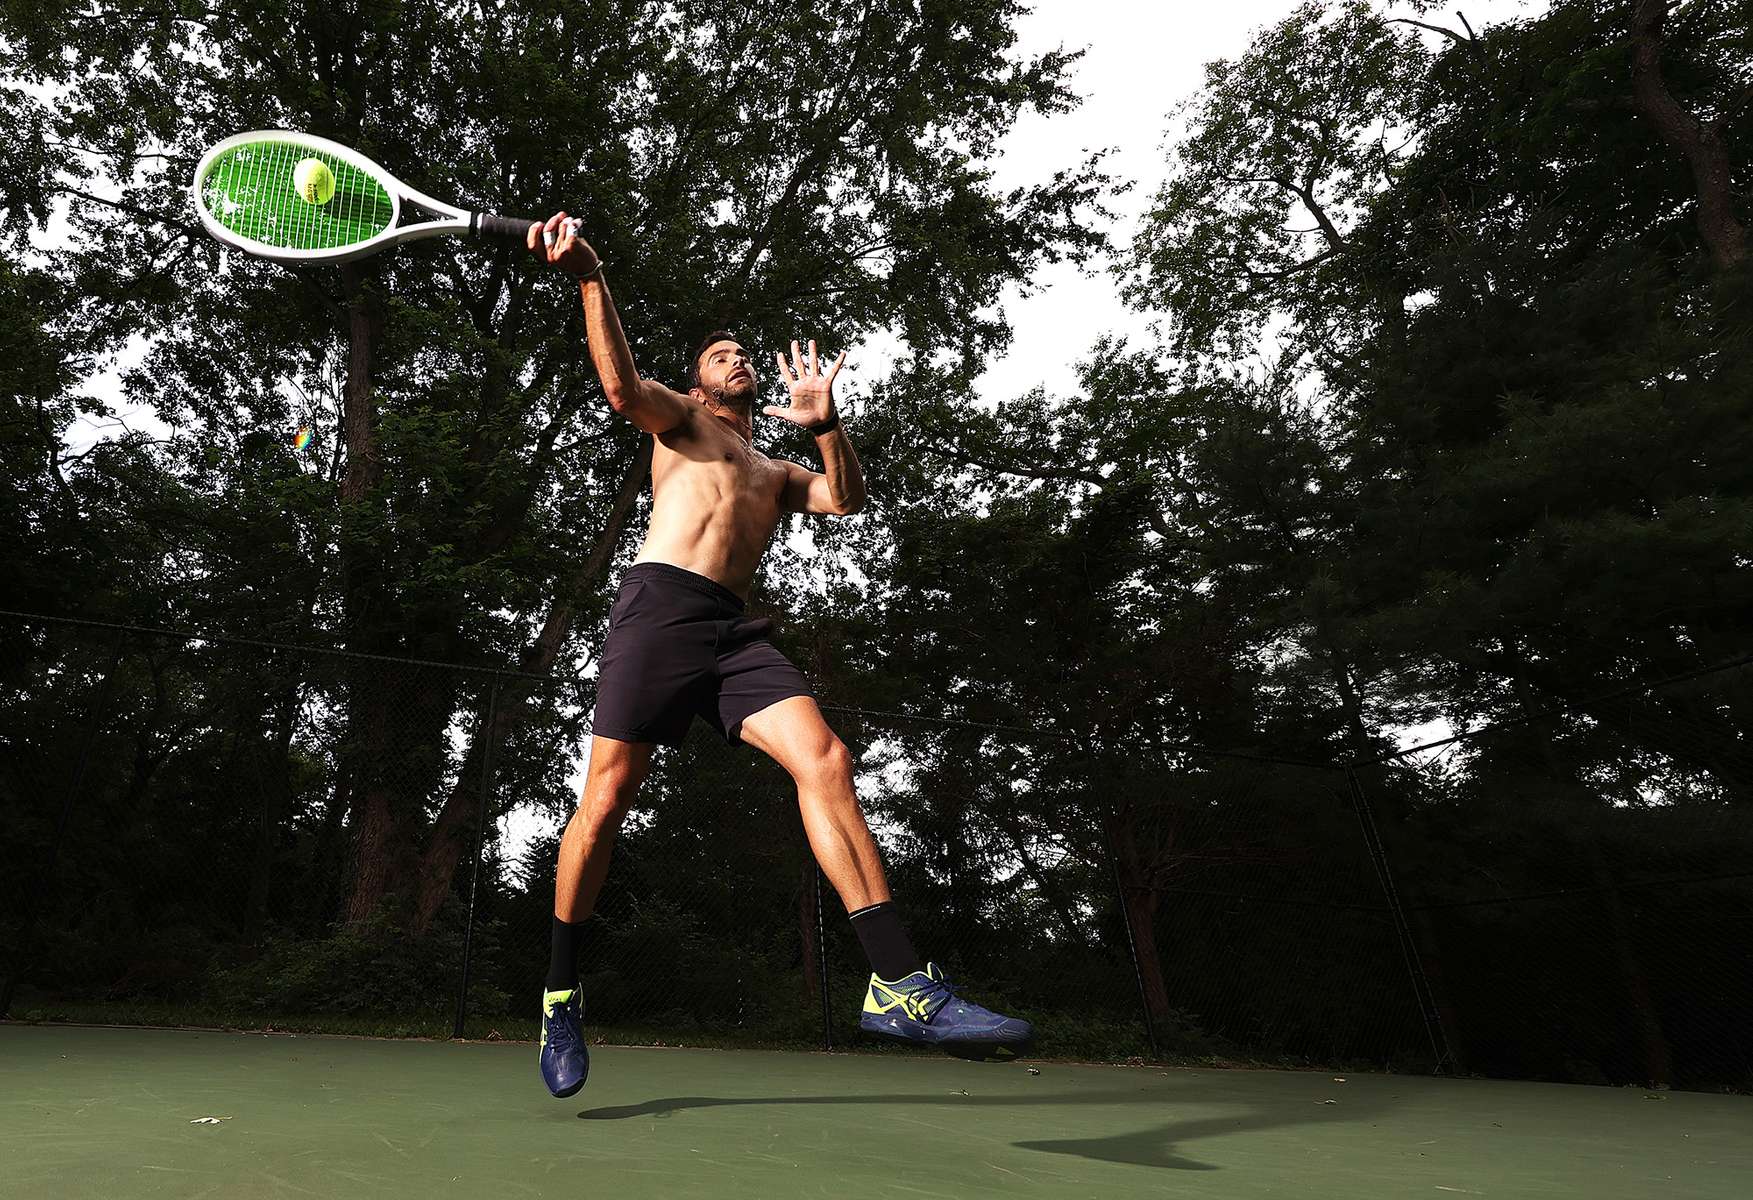 ATP Tennis player Noah Rubin of the United States trains at a friend's home on June 18, 2020 in Laurel Hollow, New York.  He hopes to qualify for the 2020 US Open which is scheduled to take place without fans beginning  on August 24th.  Athletes across the globe are now training in isolation under strict policies in place due to the Covid-19 pandemic.  